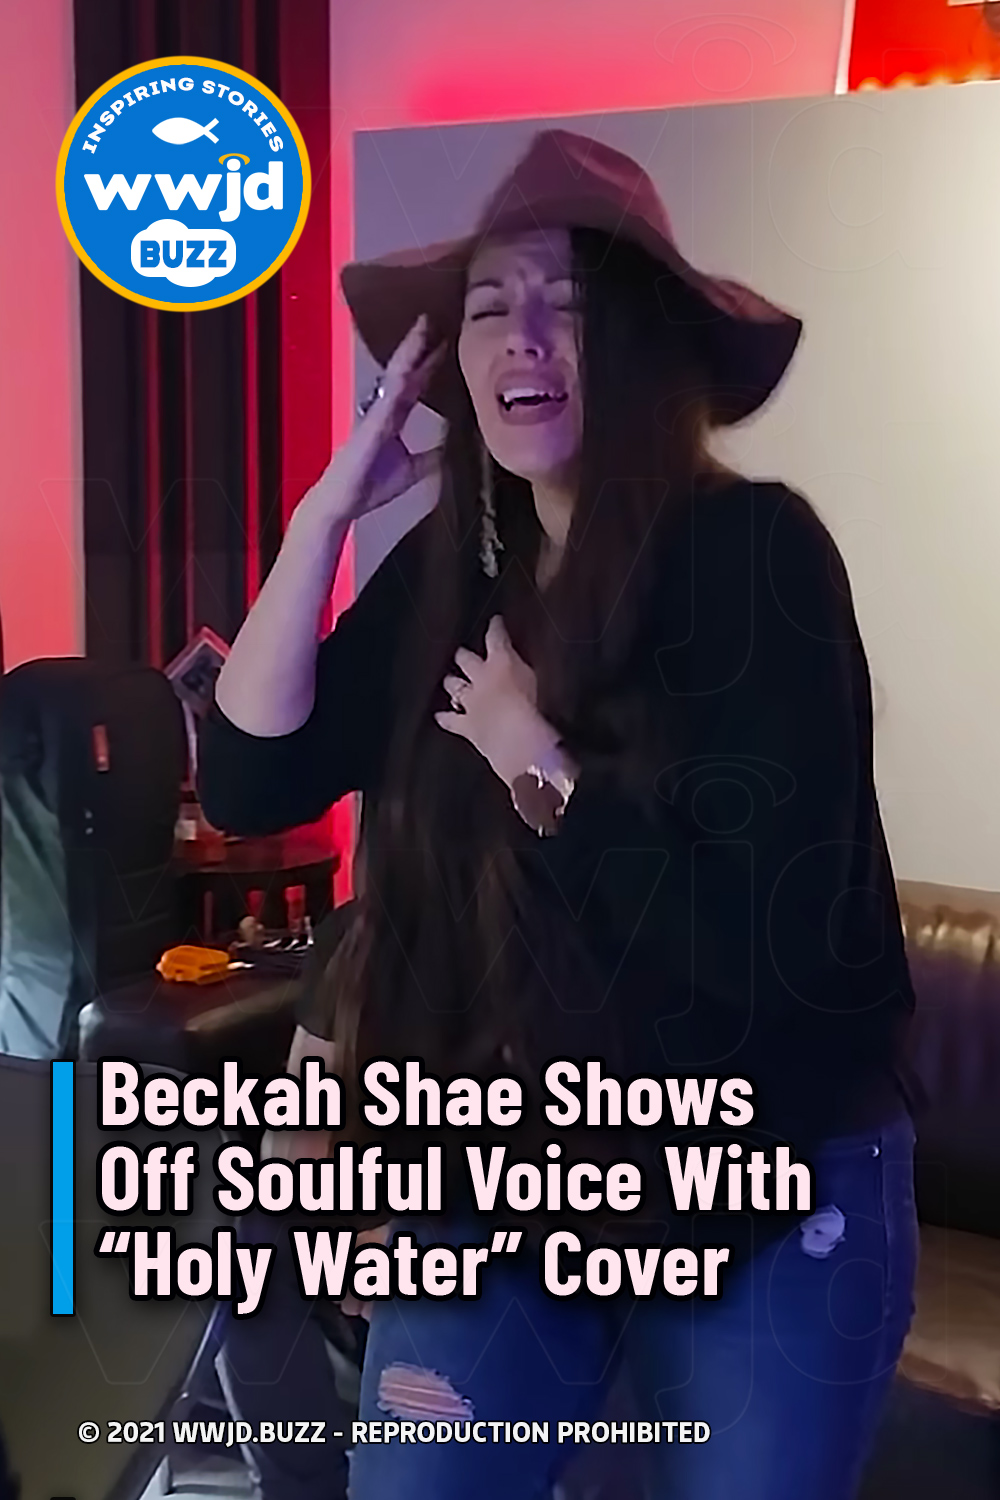 Beckah Shae Shows Off Soulful Voice With “Holy Water” Cover